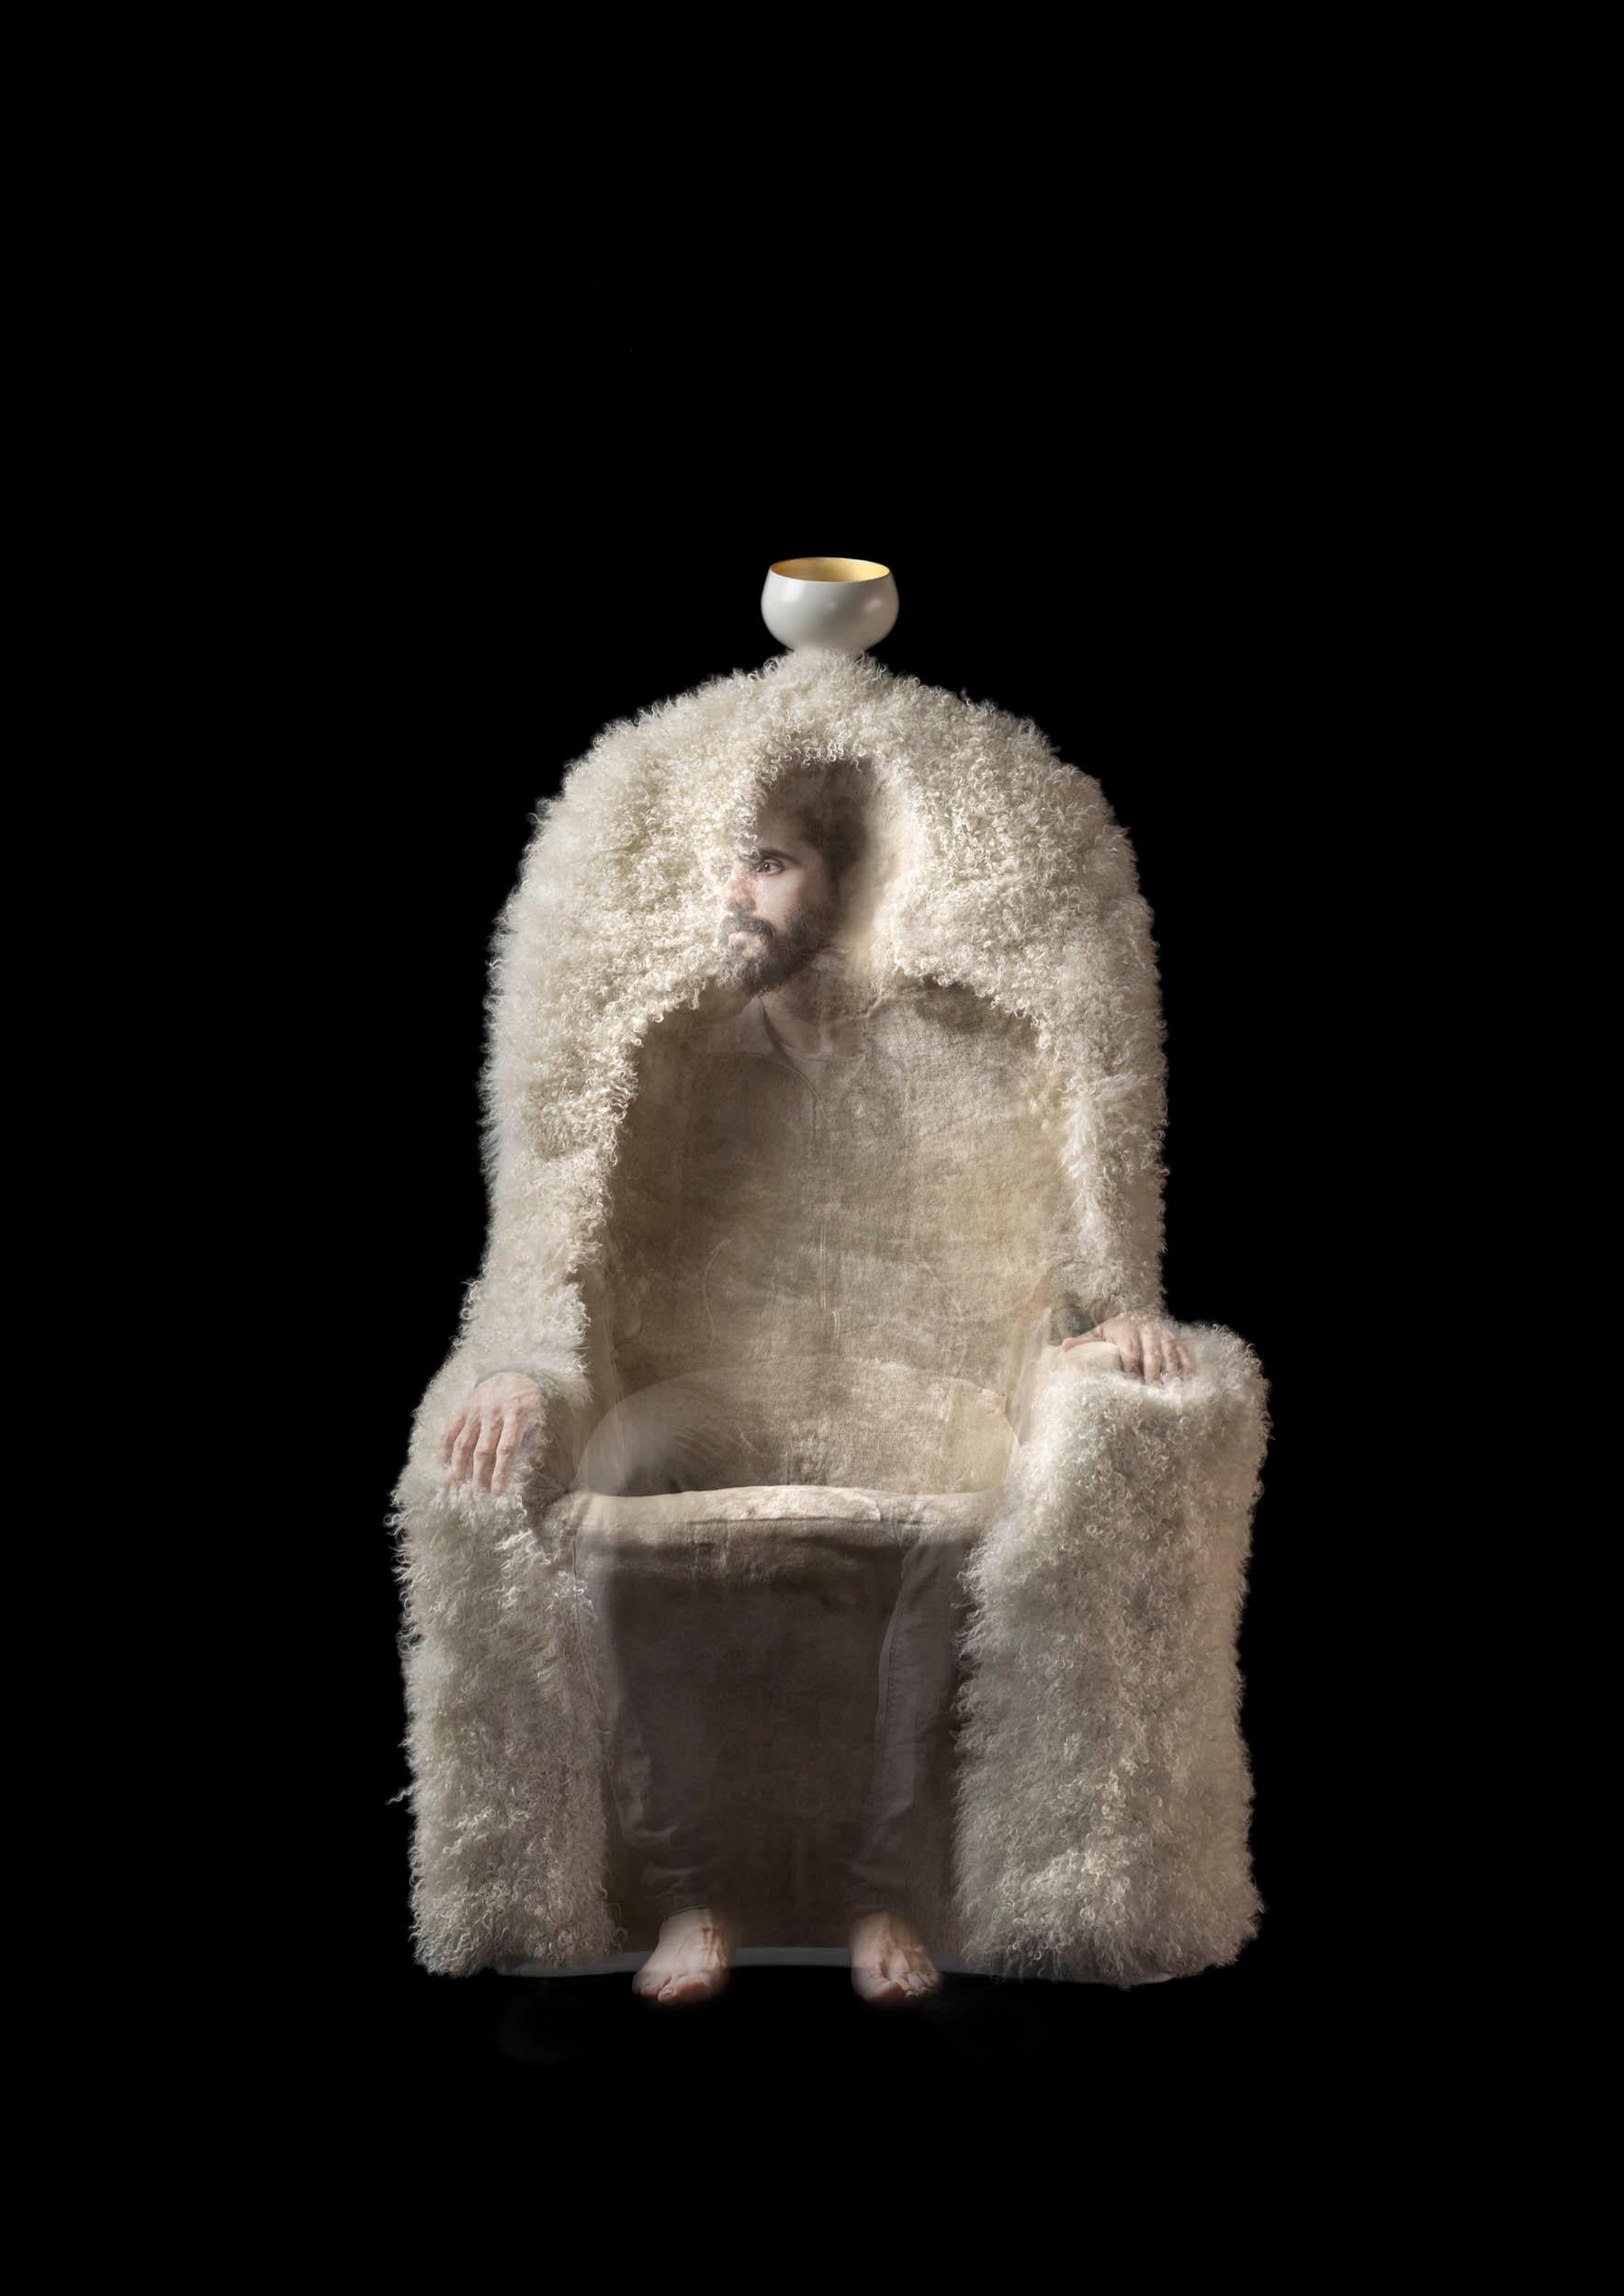 Invisible personage armchair and lamp, Salvador Dalí 
Limited edition of 20 unique pieces
Design inspired on an artwork by Salvador Dalí
Dimensions: 80 x 90 x 150 H cm
Materials: Composite structure upholstered in sheepskin.
 Polyamide lacquered